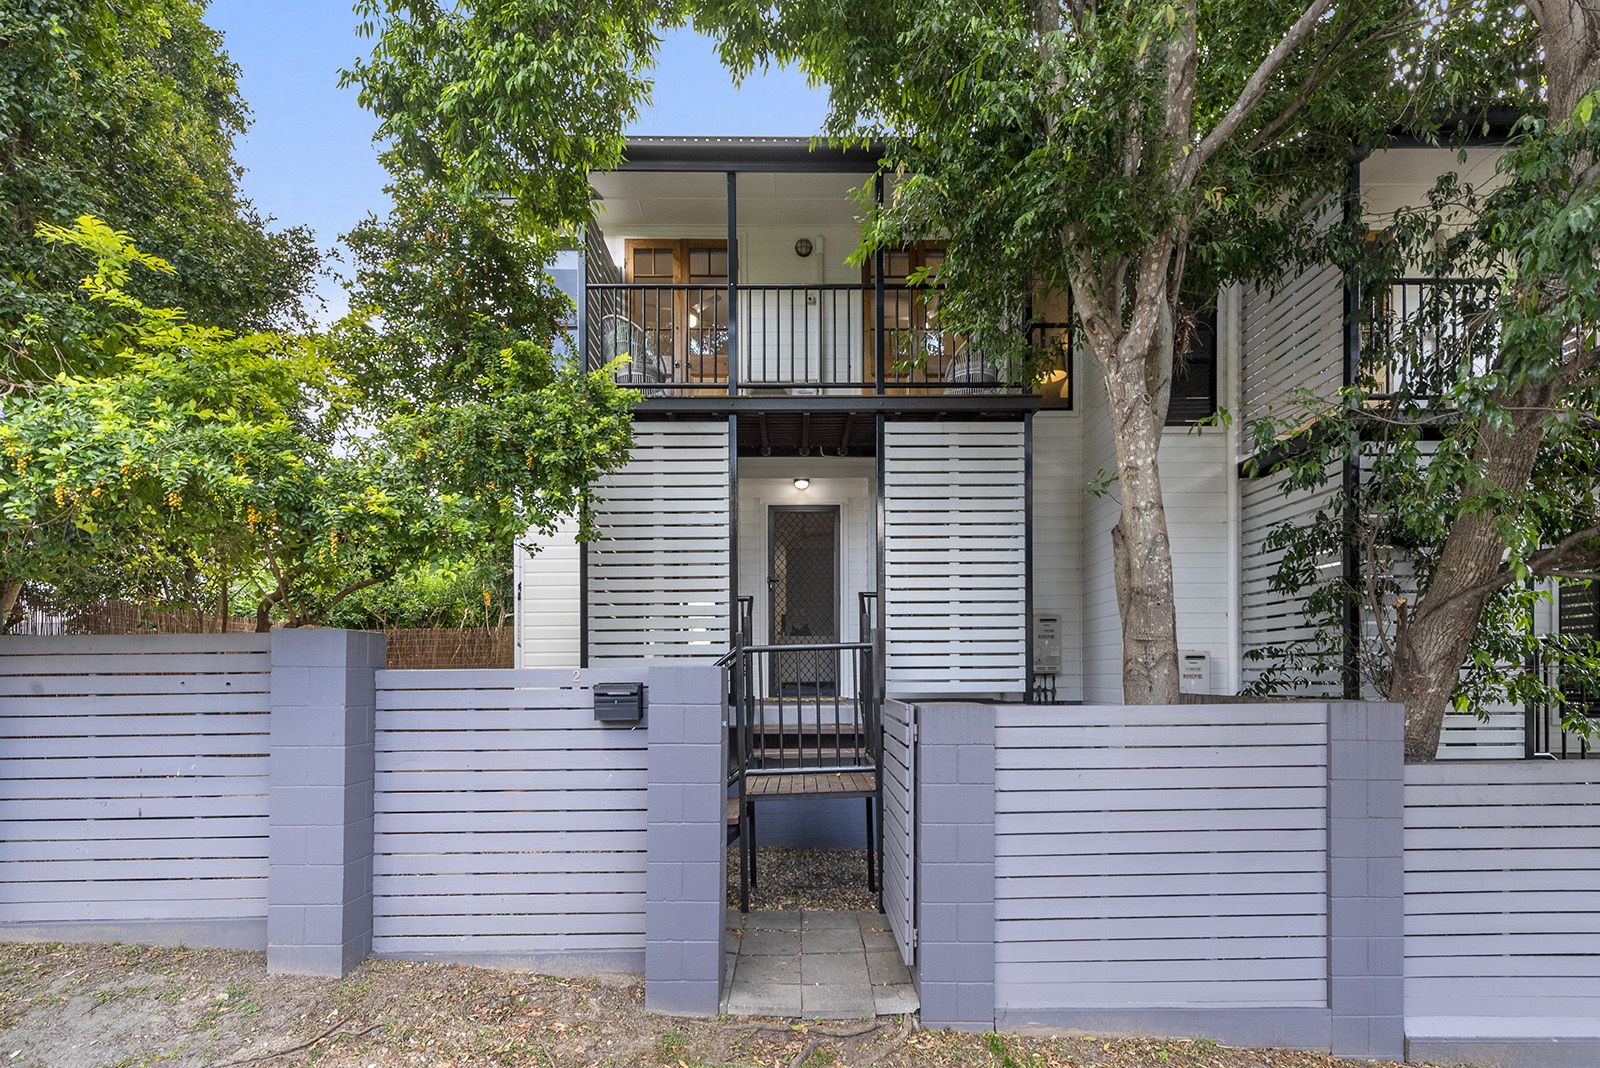 2/26 Rosetta Street, Fortitude Valley QLD 4006, Image 0